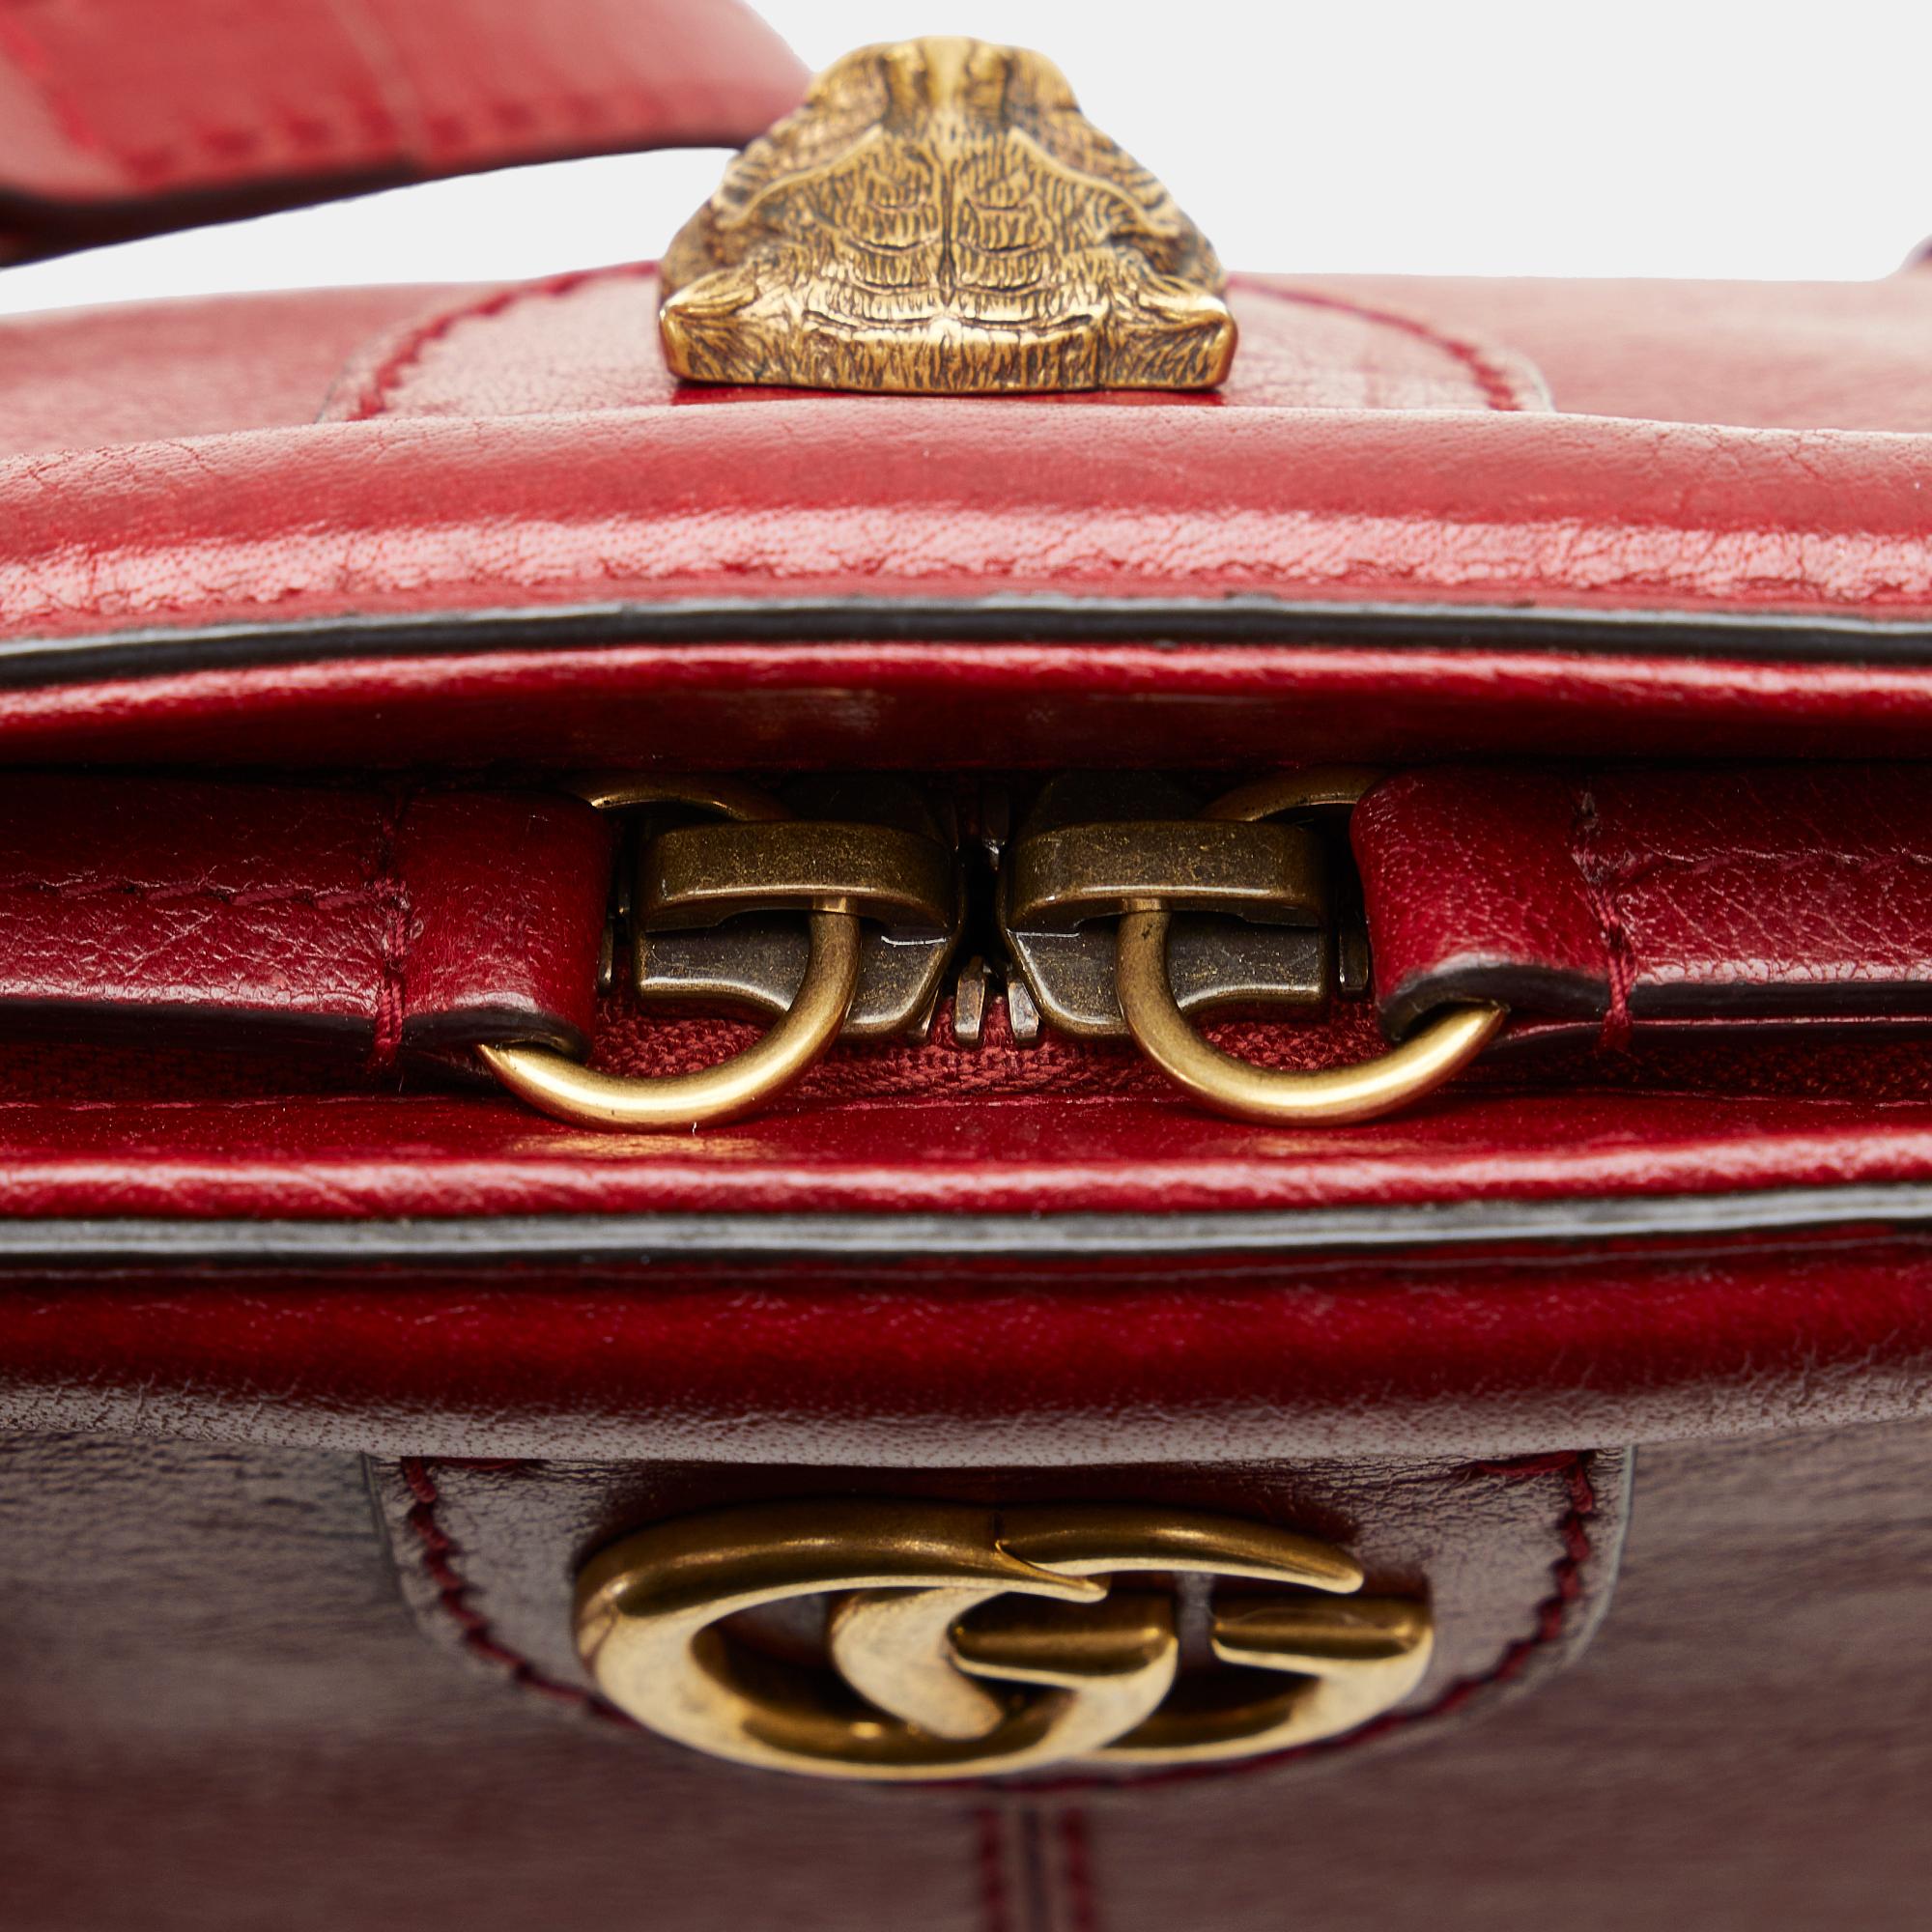 Gucci Red Small Re(belle) Crossbody Bag